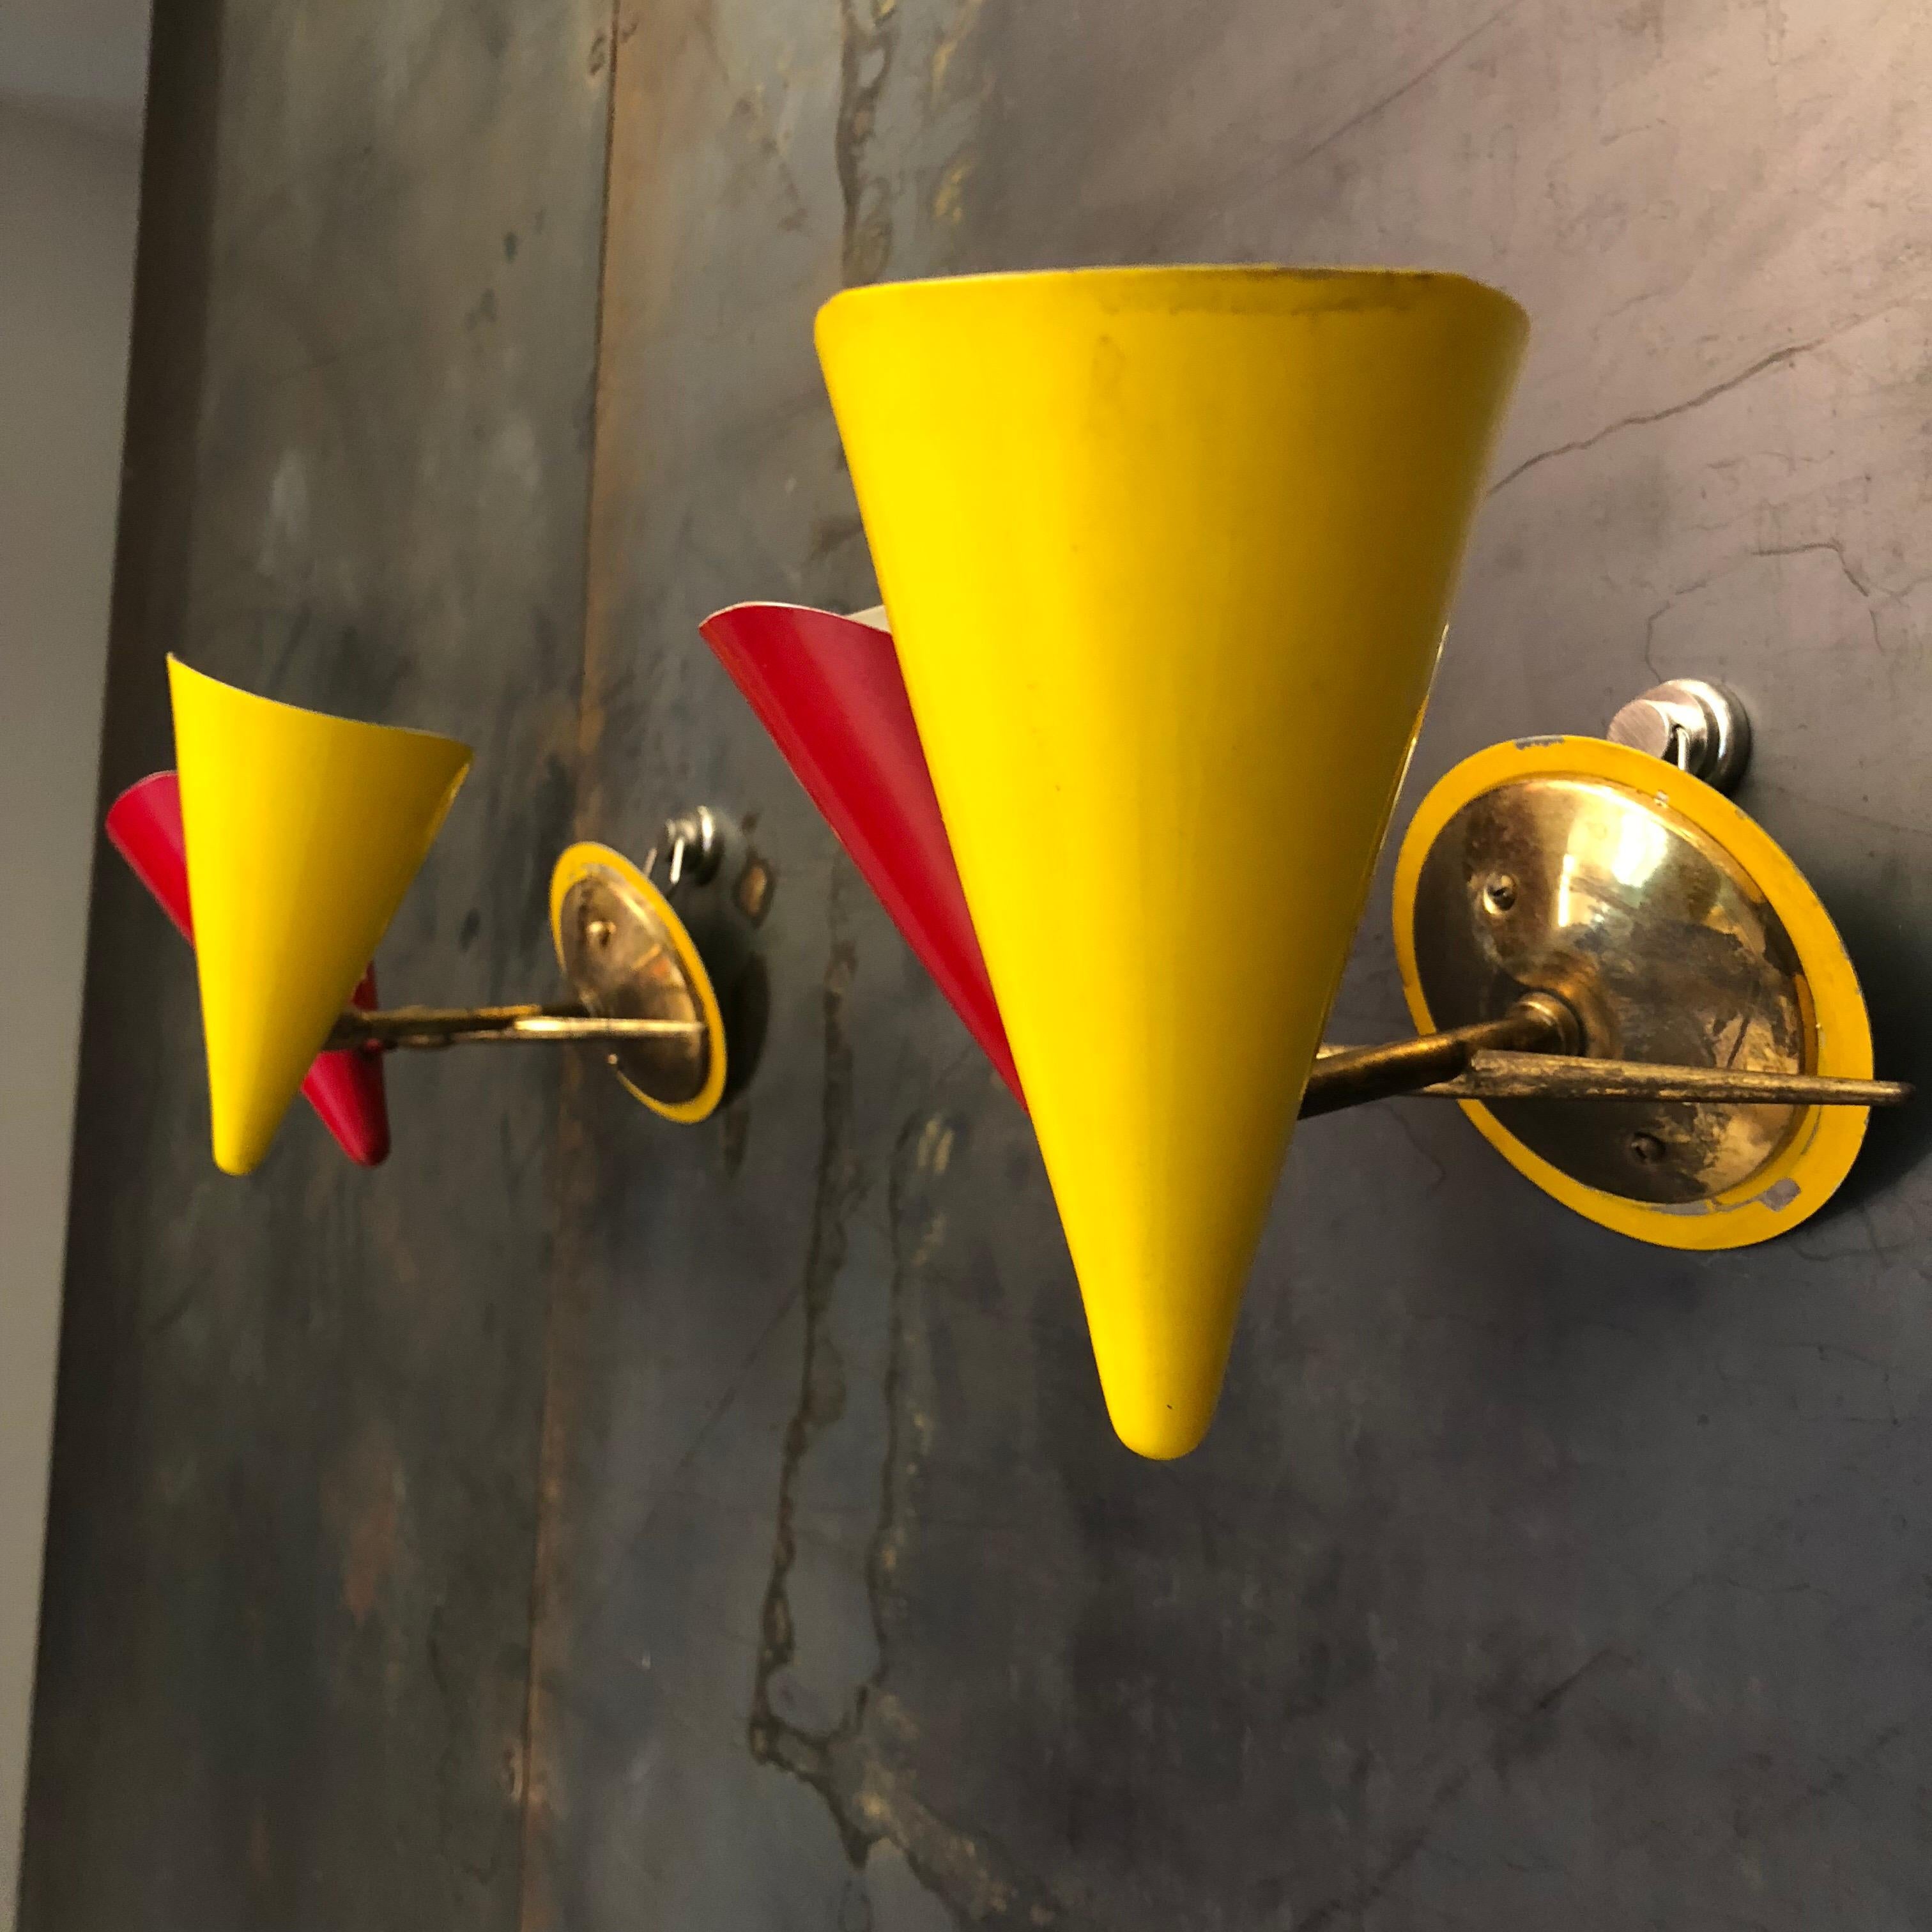 Italian Stilnovo Brass and Lacquered Metal Sconces with Double Cones, 1950s For Sale 2